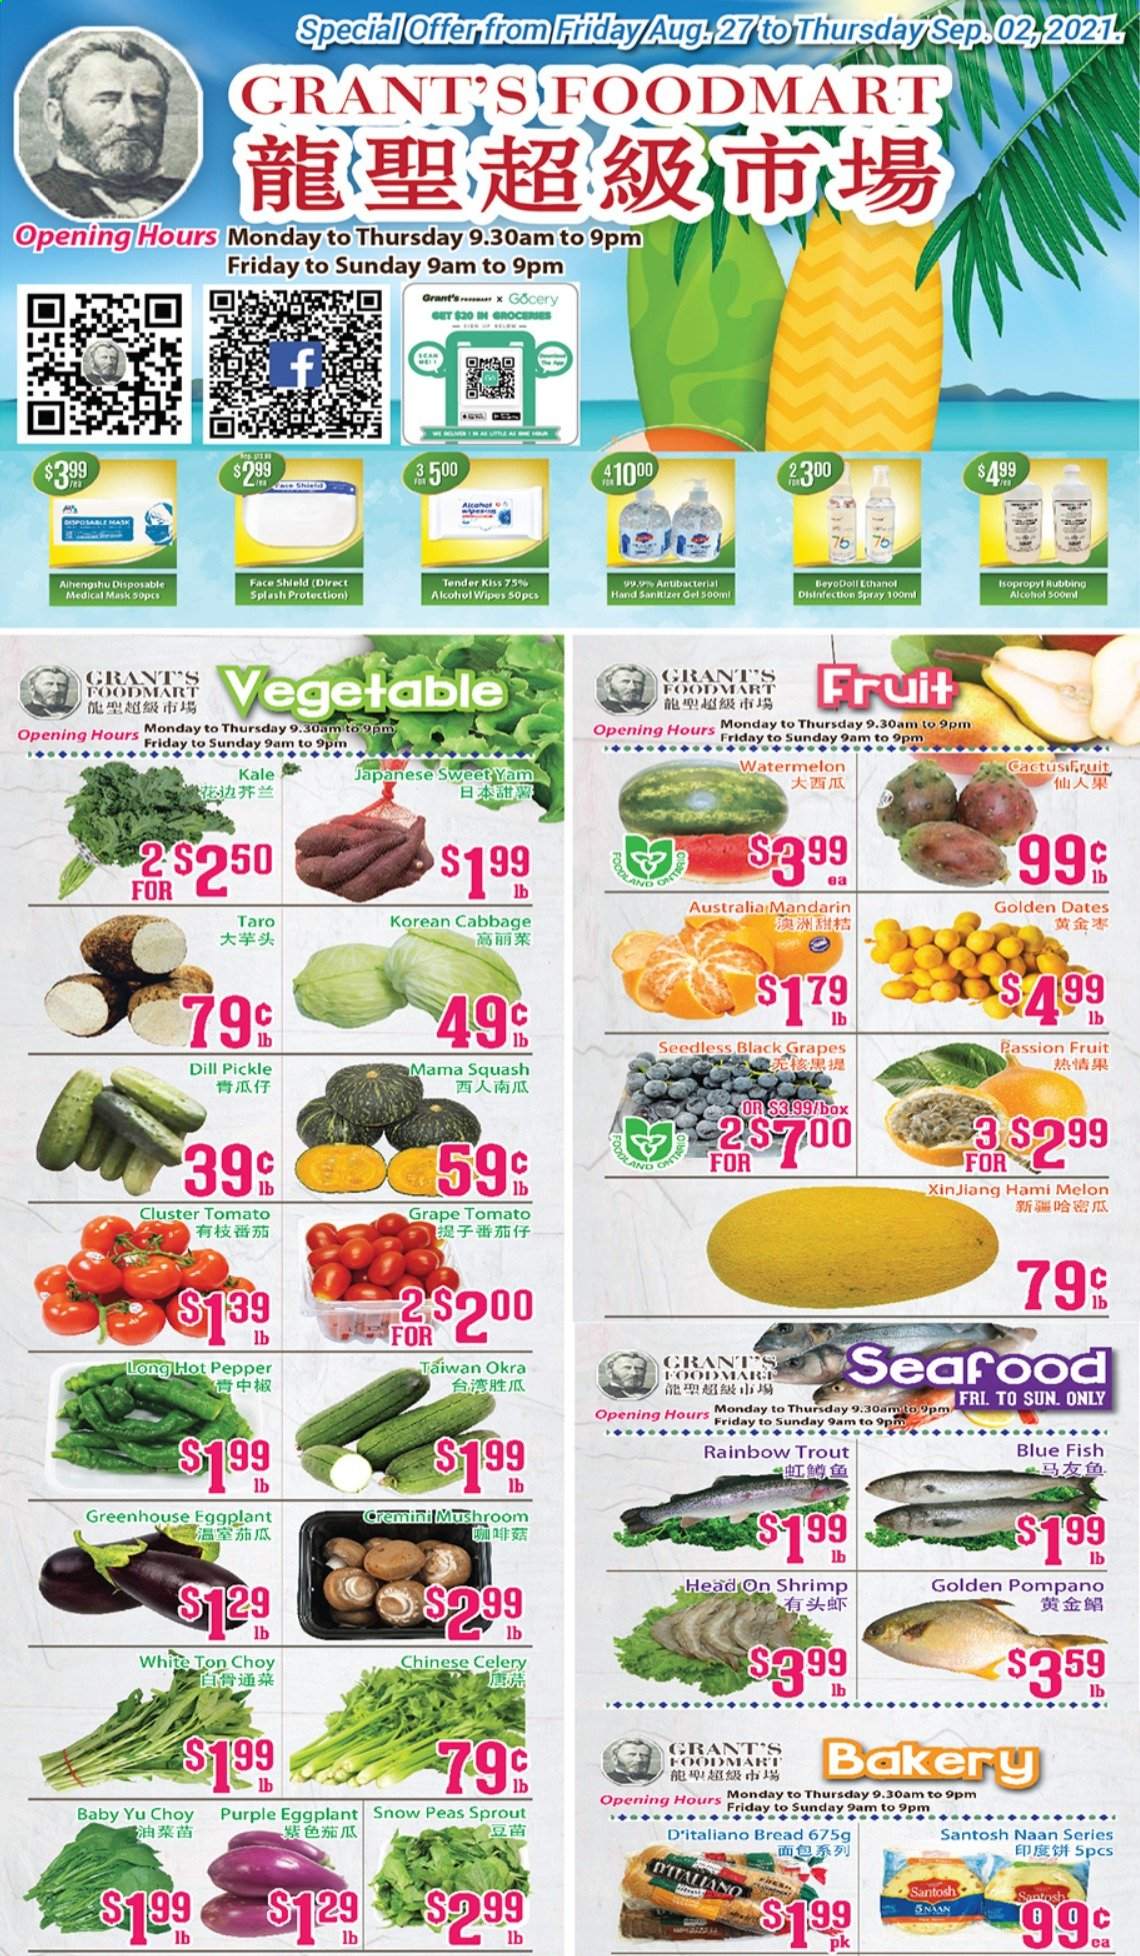 thumbnail - Grant's Foodmart Flyer - August 27, 2021 - September 02, 2021 - Sales products - mushrooms, bread, cabbage, celery, kale, peas, okra, eggplant, mandarines, watermelon, melons, trout, pompano, seafood, fish, shrimps, snow peas, dill pickle, dill, pepper, dried dates, Grant's, wipes, hand sanitizer. Page 1.